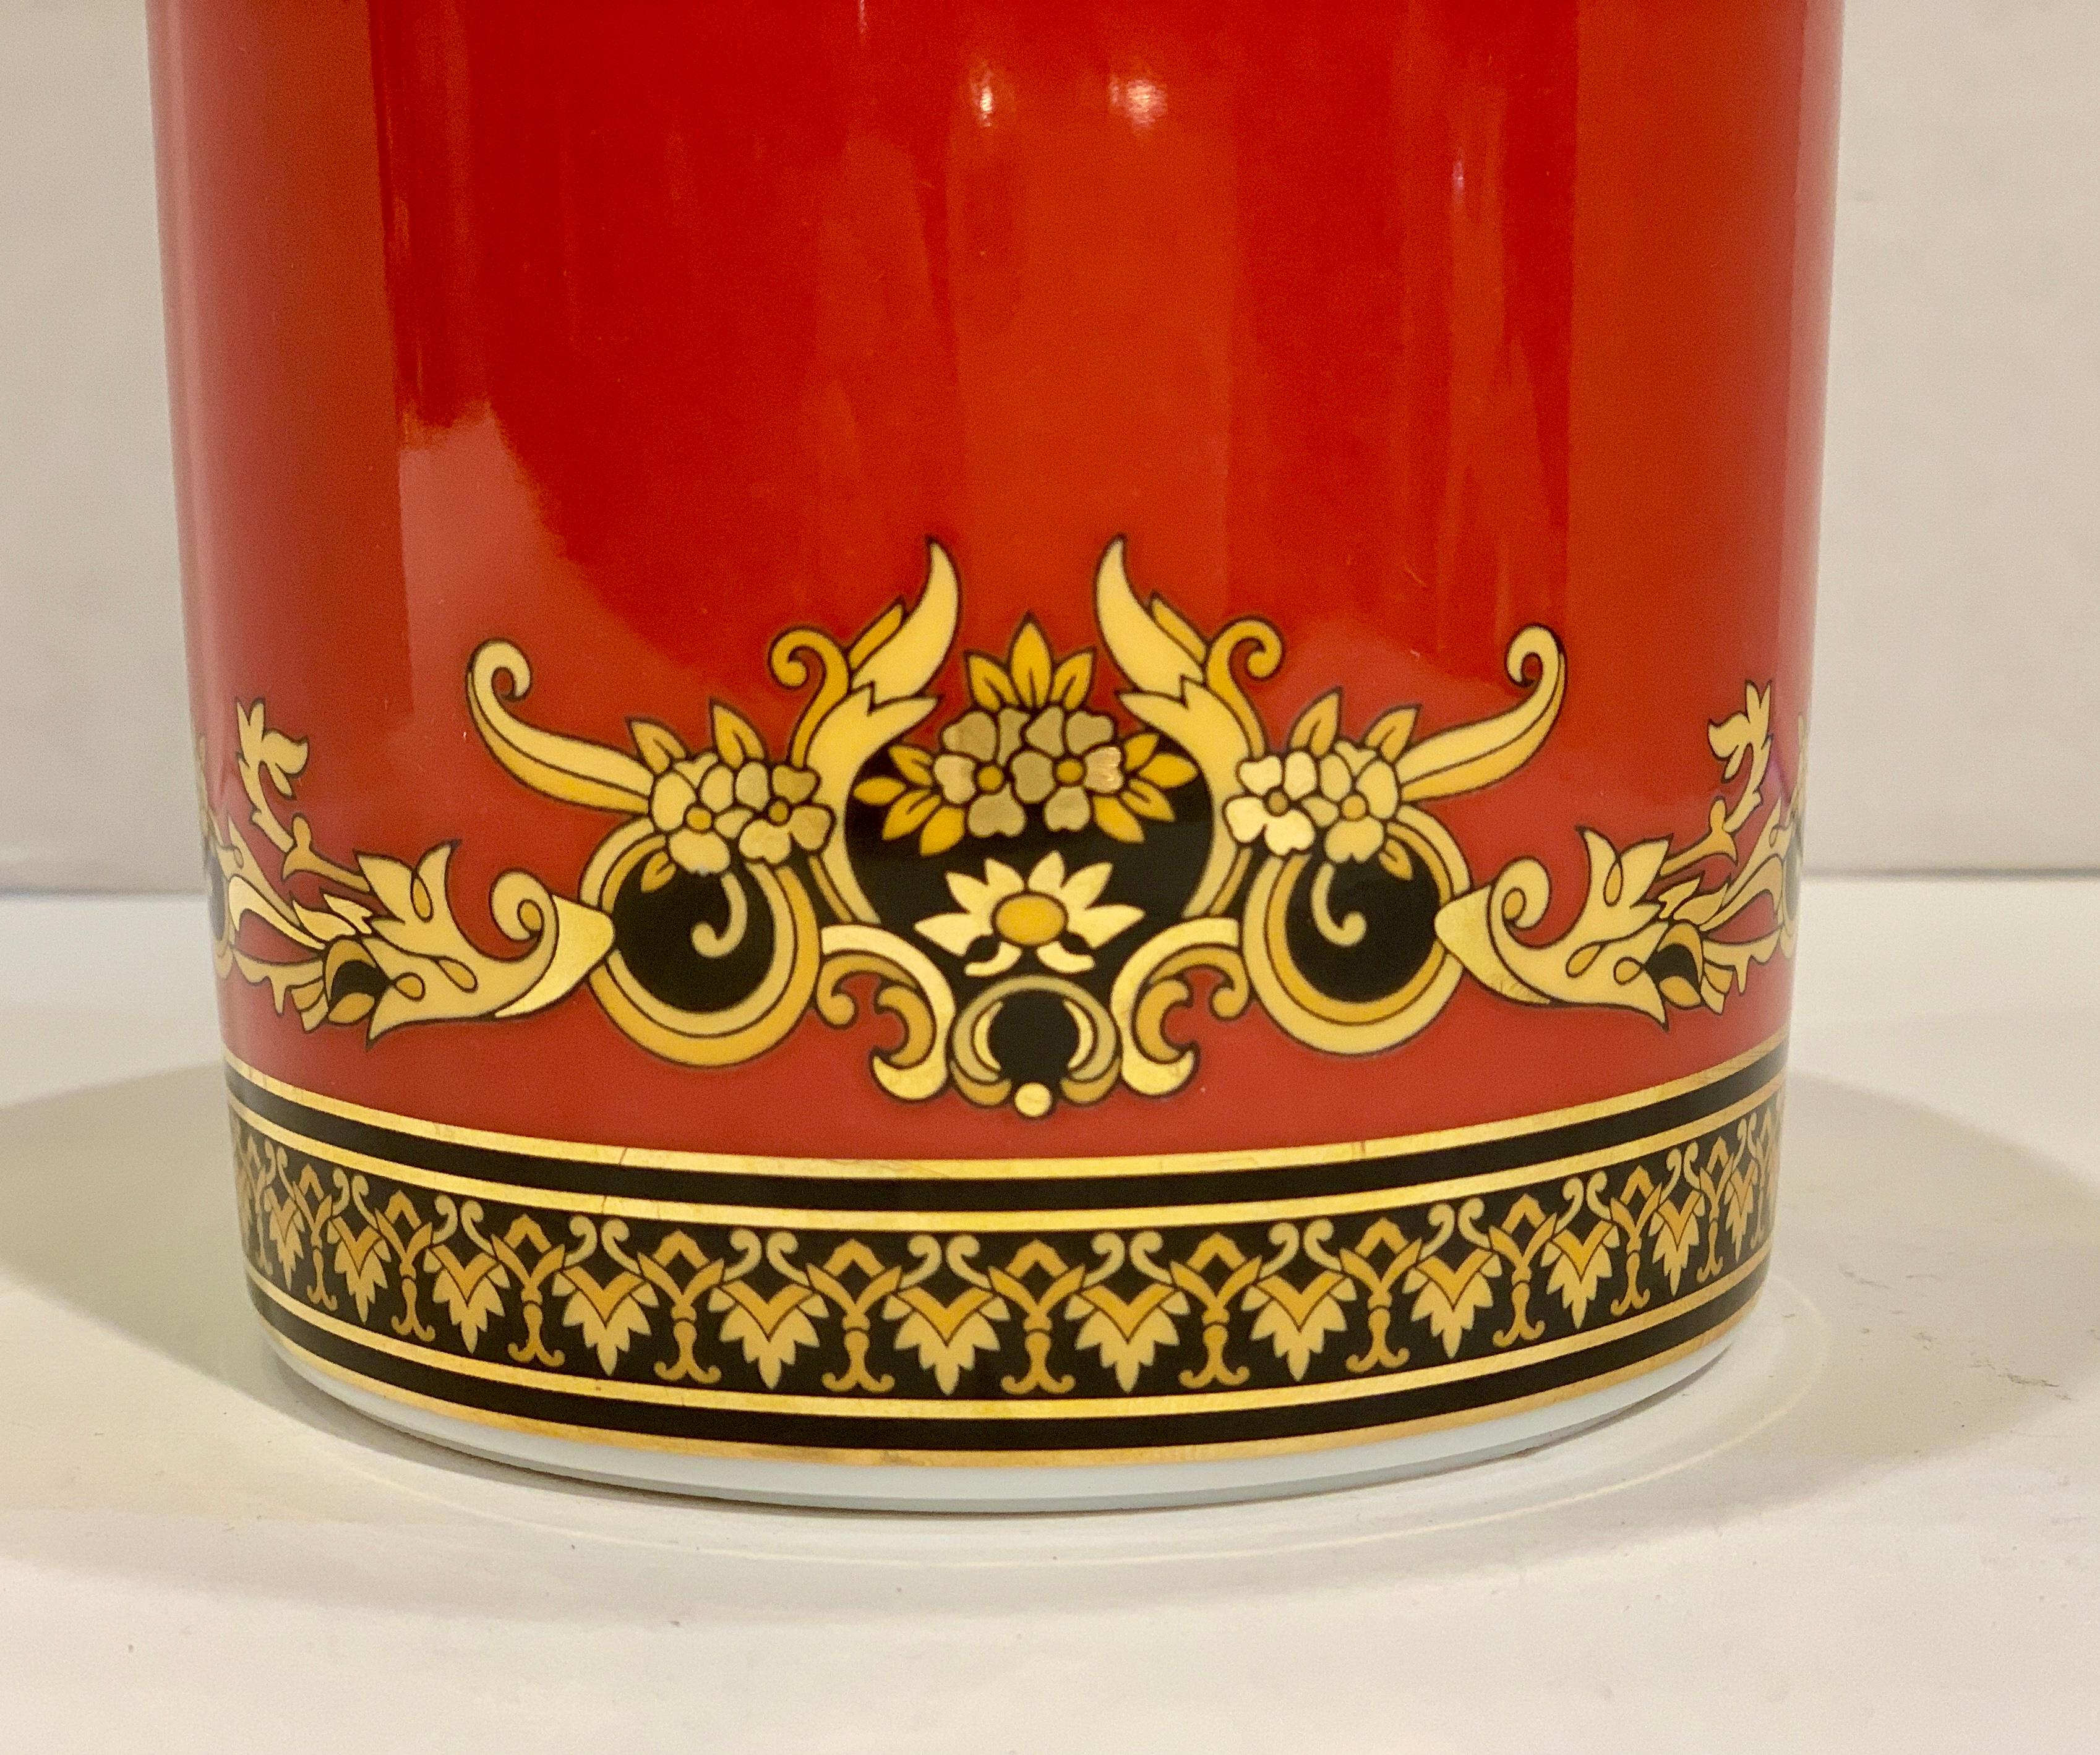 Contemporary Magnificent Versace Porcelain Vase “Medusa Red Collection” by Rosenthal